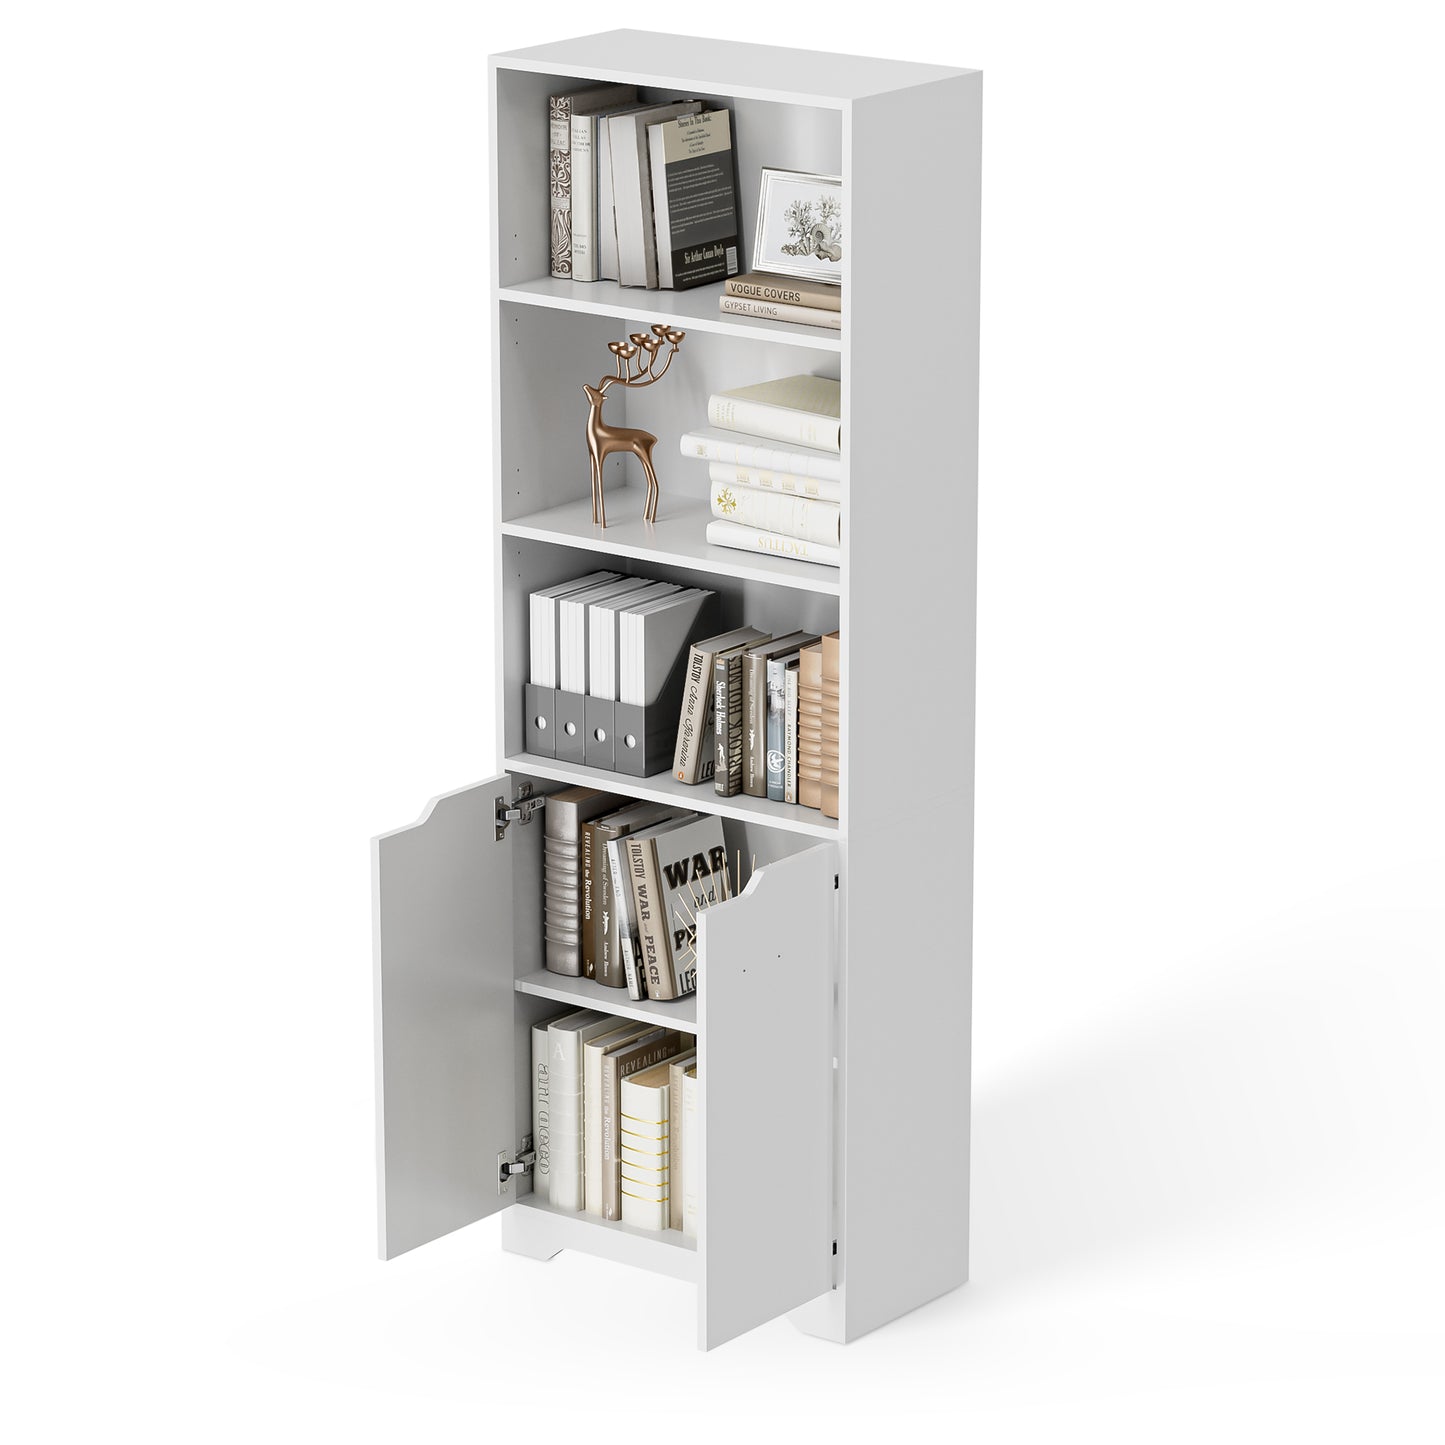 Bookcase with Doors, Storage Organizer Cabinet with 3 Open Shelves, Book Shelf Free Standing Floor Cabinet for Home Office, White